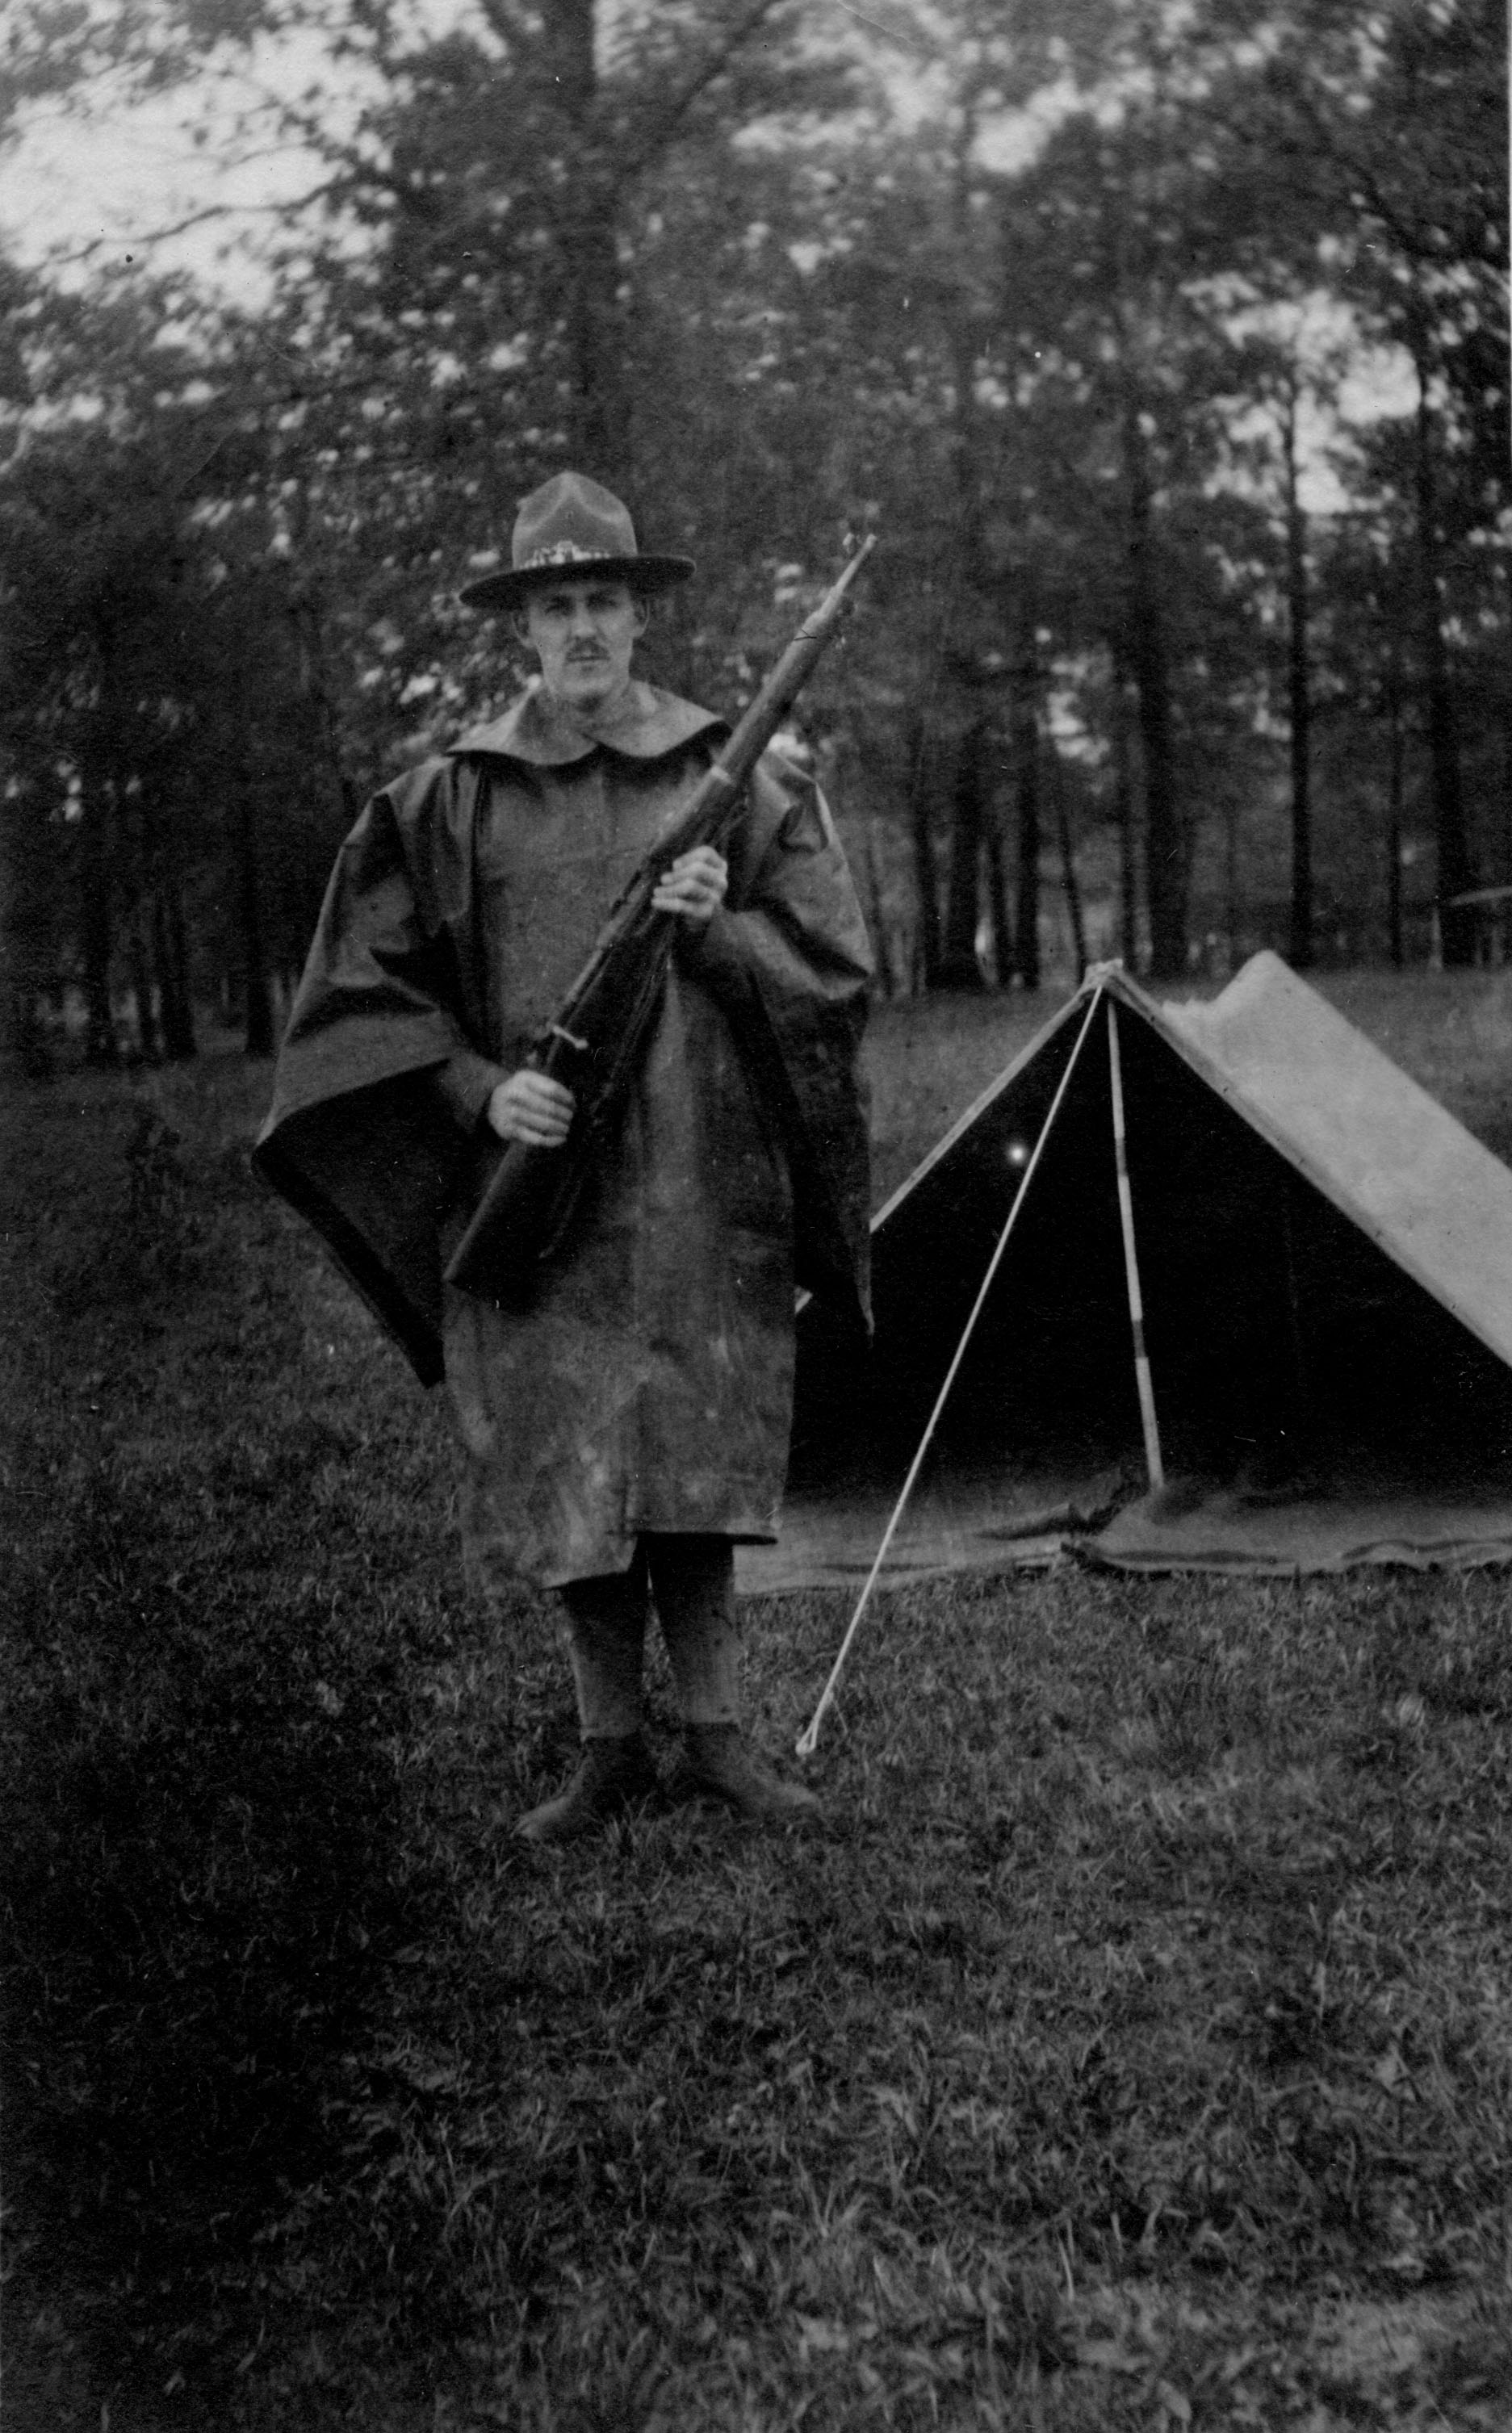 Soldier with Rifle Outside Tent, circa 1918